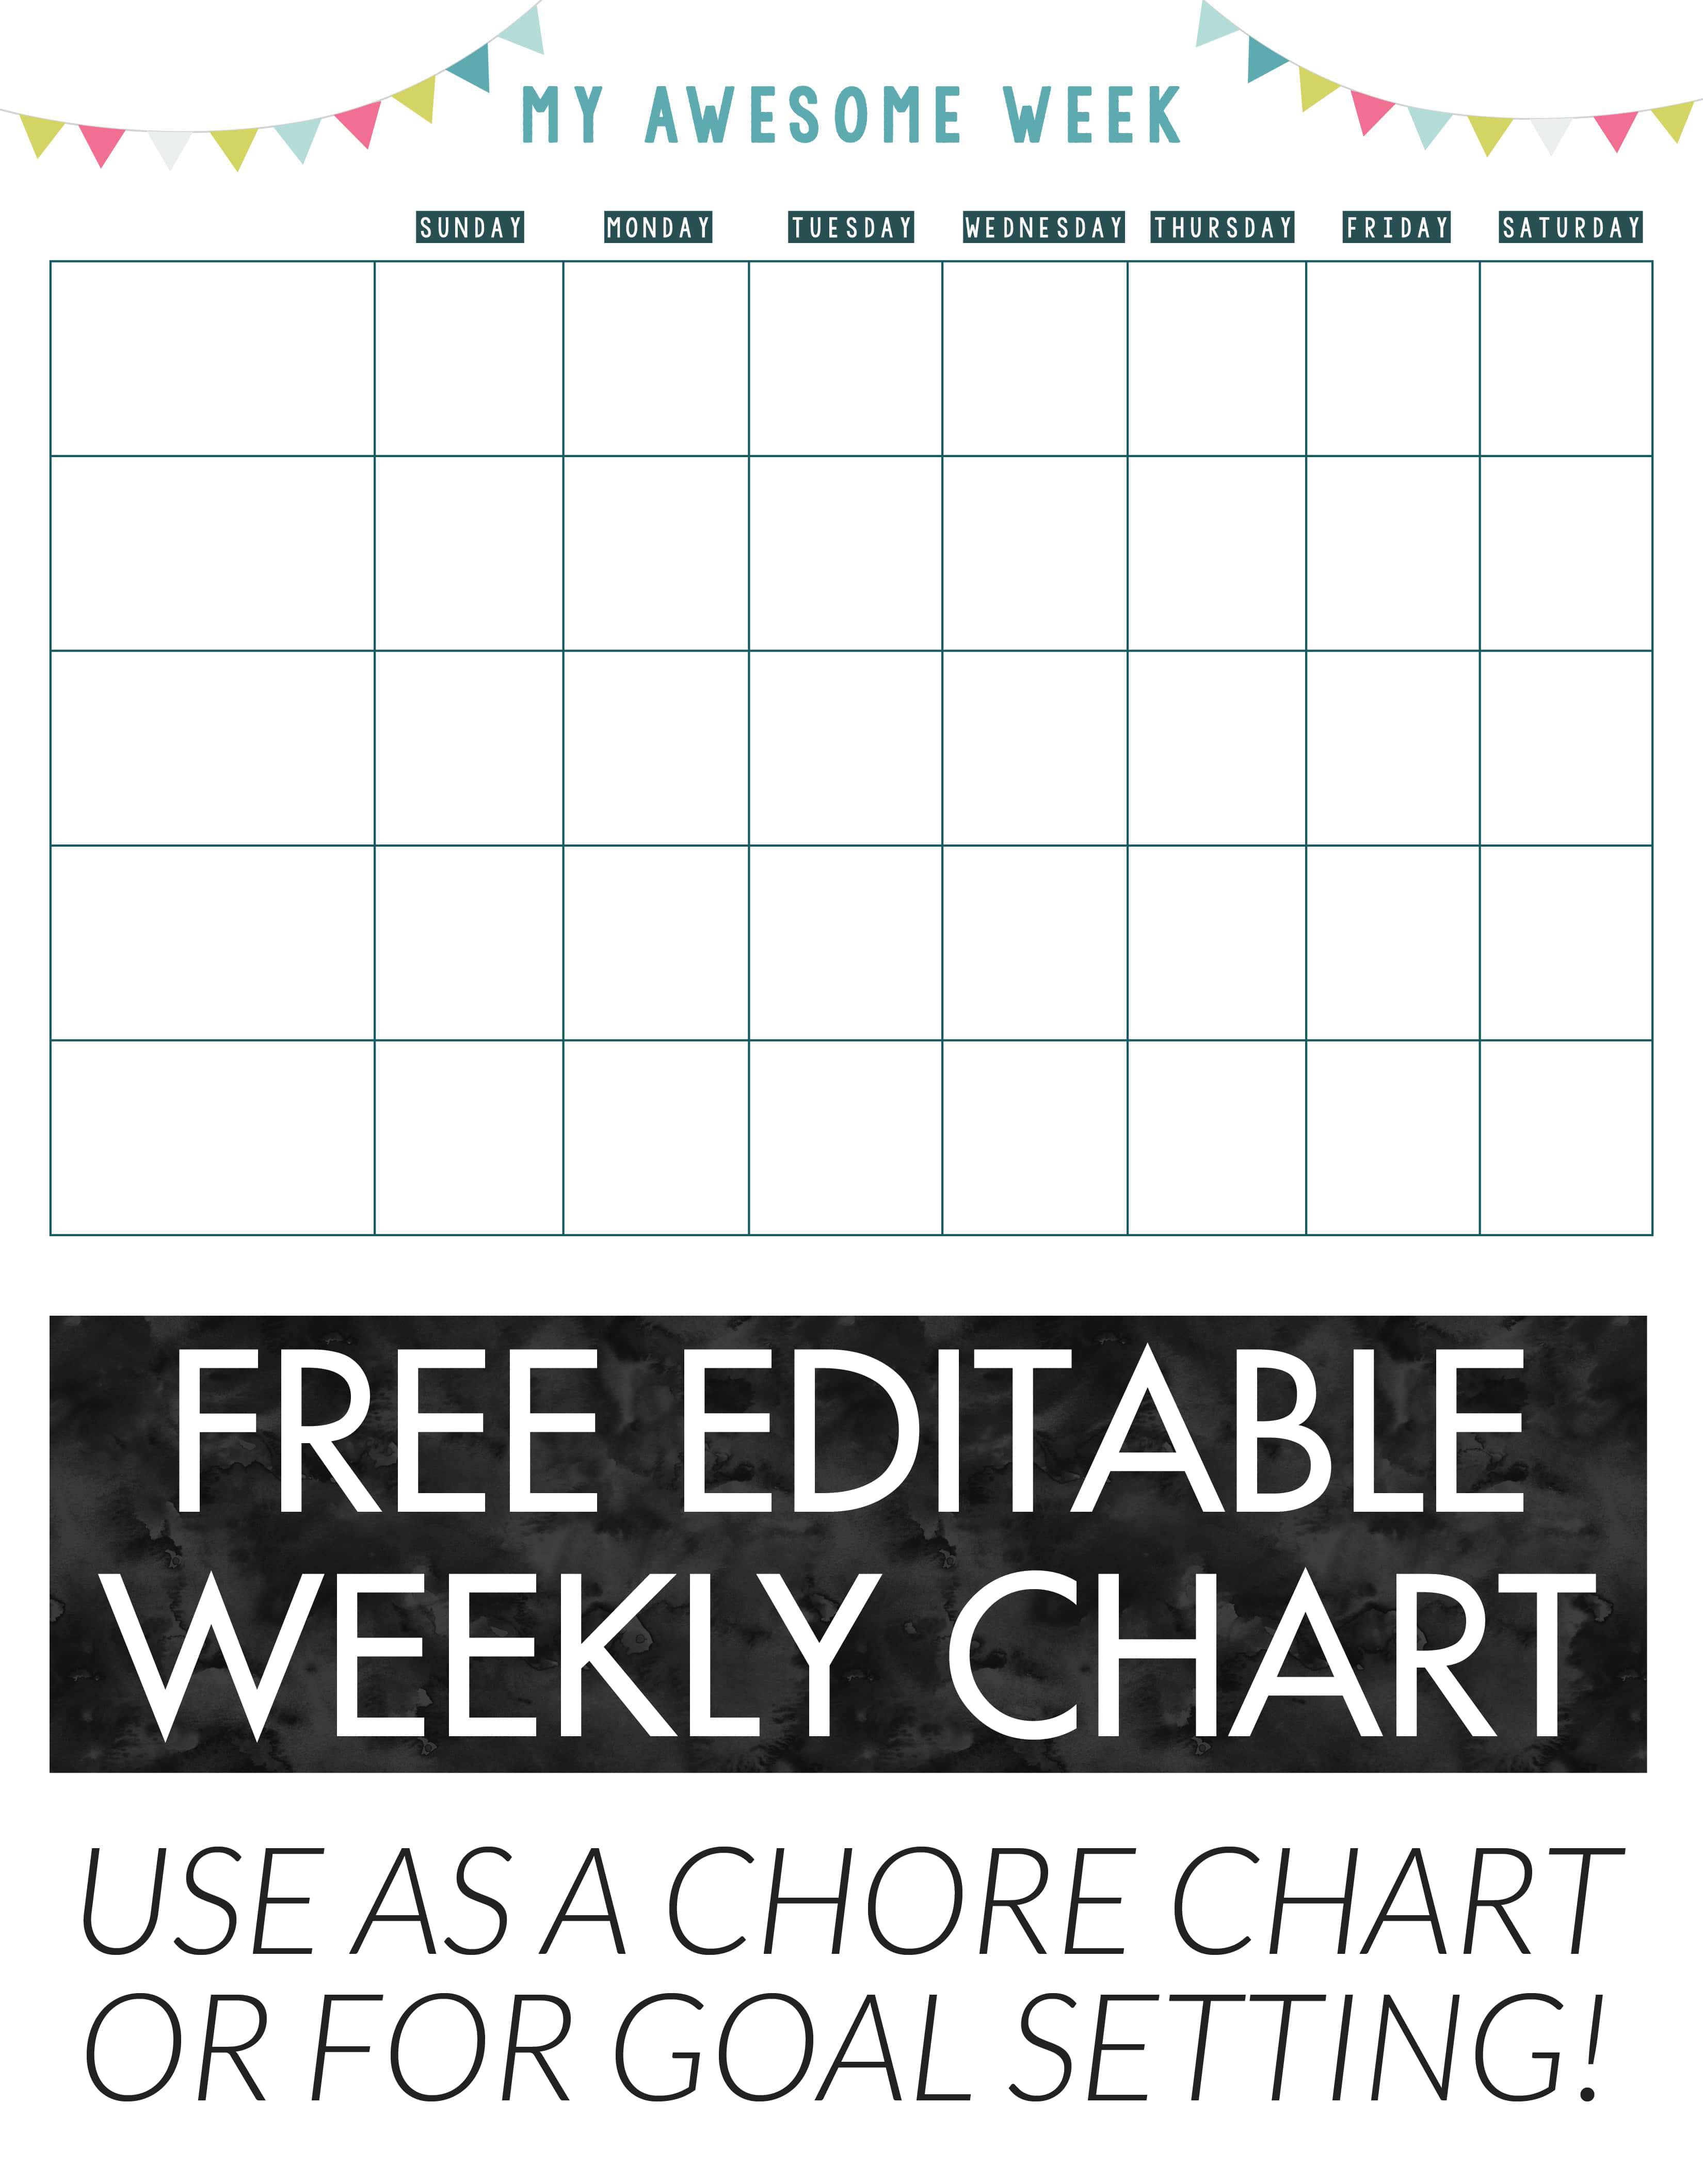 FREE editable weekly chart - great to use as a chore chart for kids or goal setting! You can type in the PDF yourself and print!